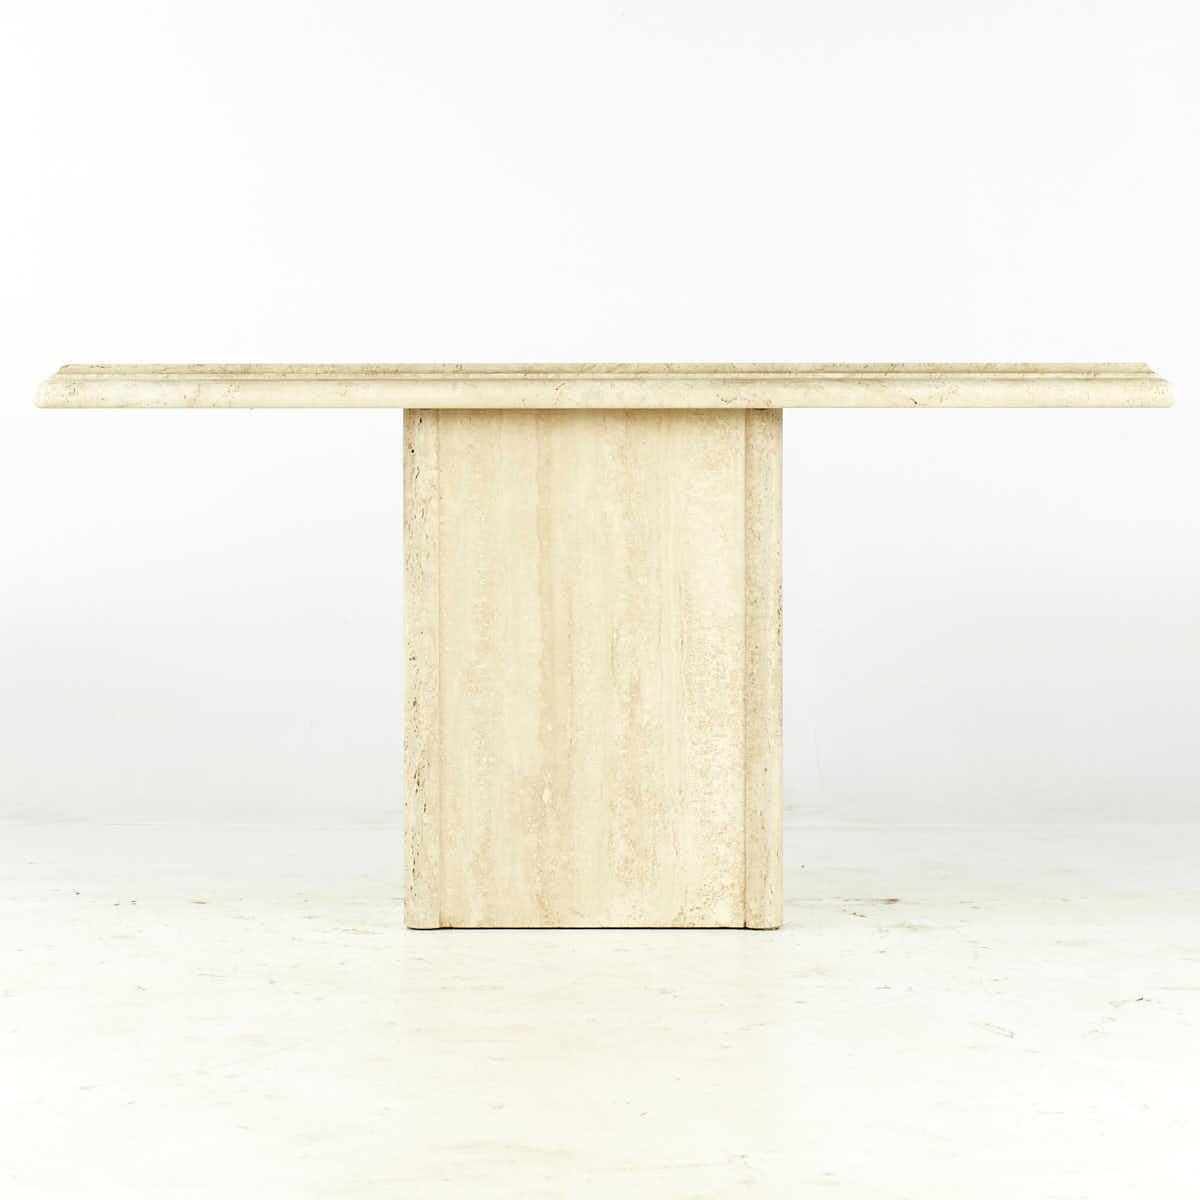 Mid Century Travertine Console Table

This table measures: 59.5 wide x 20.5 deep x 30 inches tall

All pieces of furniture can be had in what we call restored vintage condition. That means the piece is restored upon purchase so it’s free of